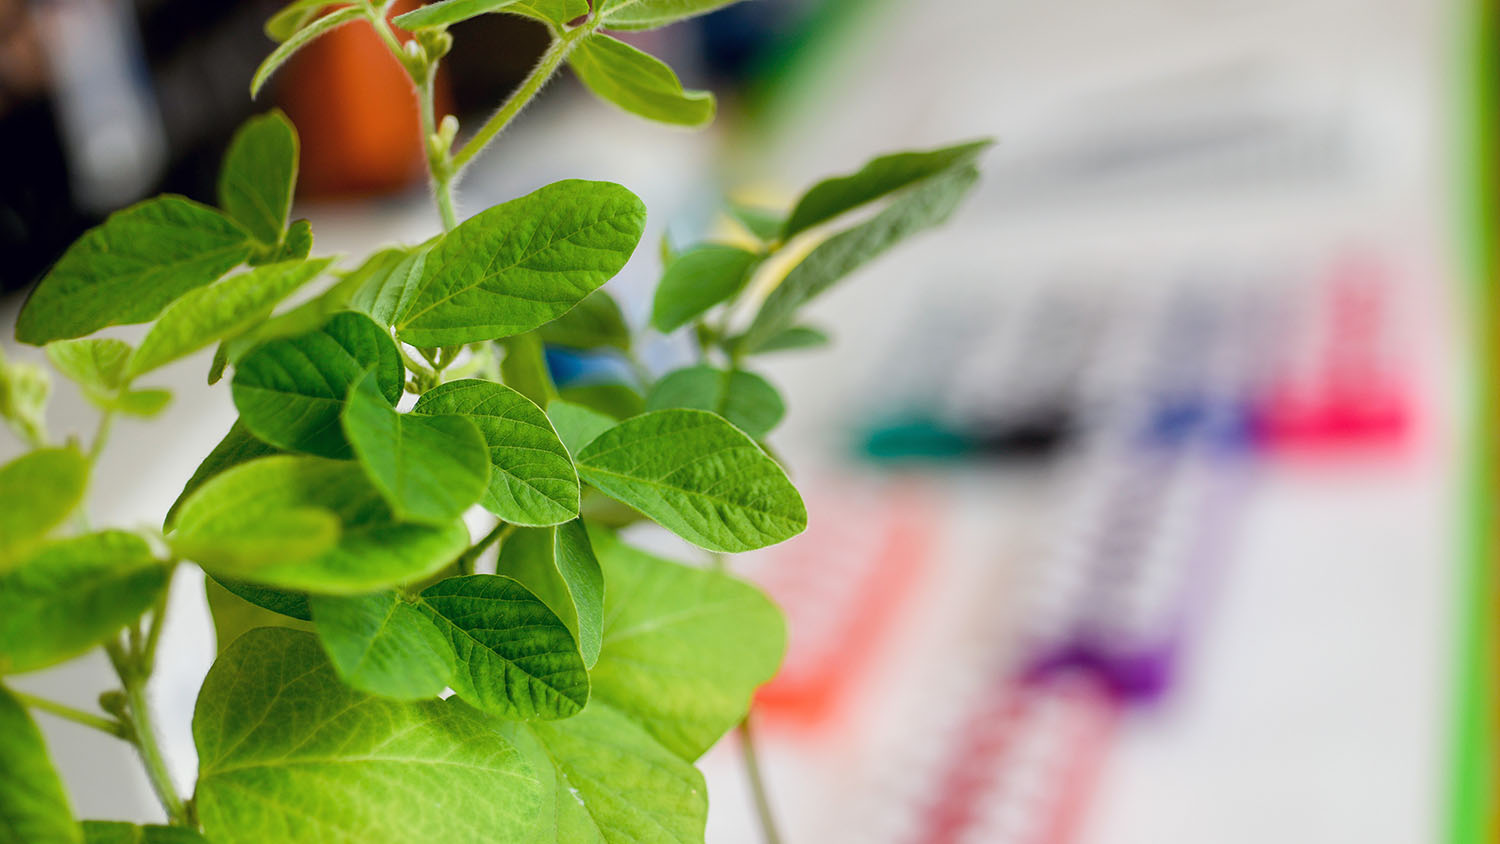 Crispr Plants New Non Gmo Method To Edit Plants College Of Agriculture And Life Sciences